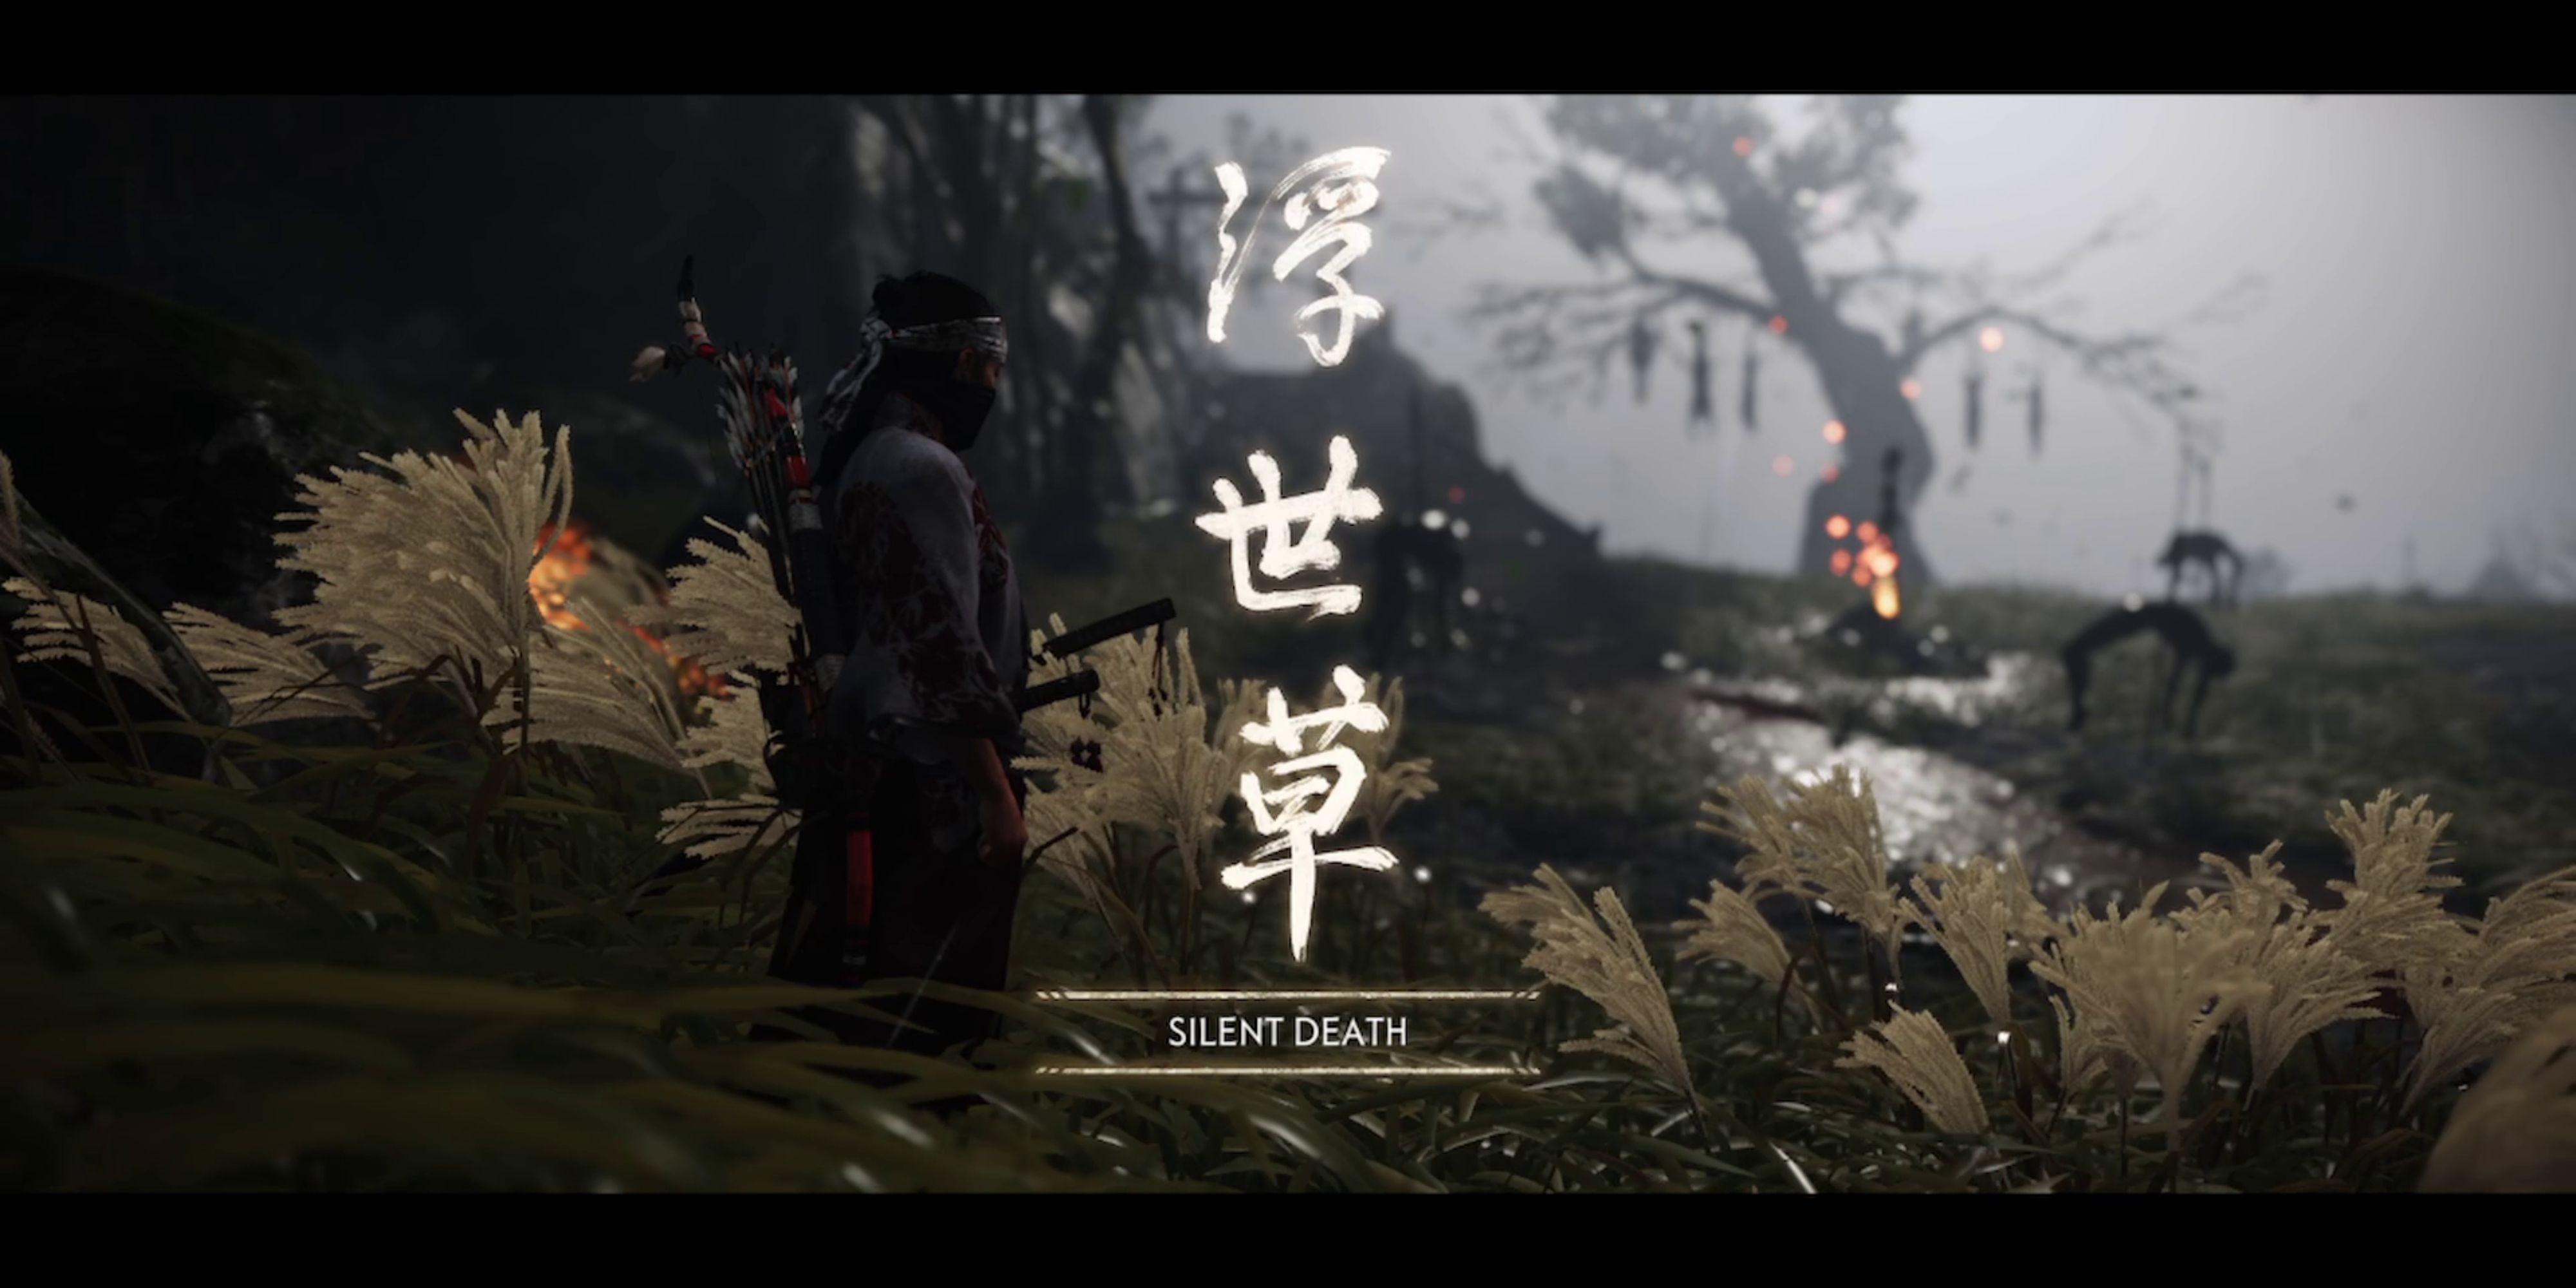 silent death logo in ghost of tsushima